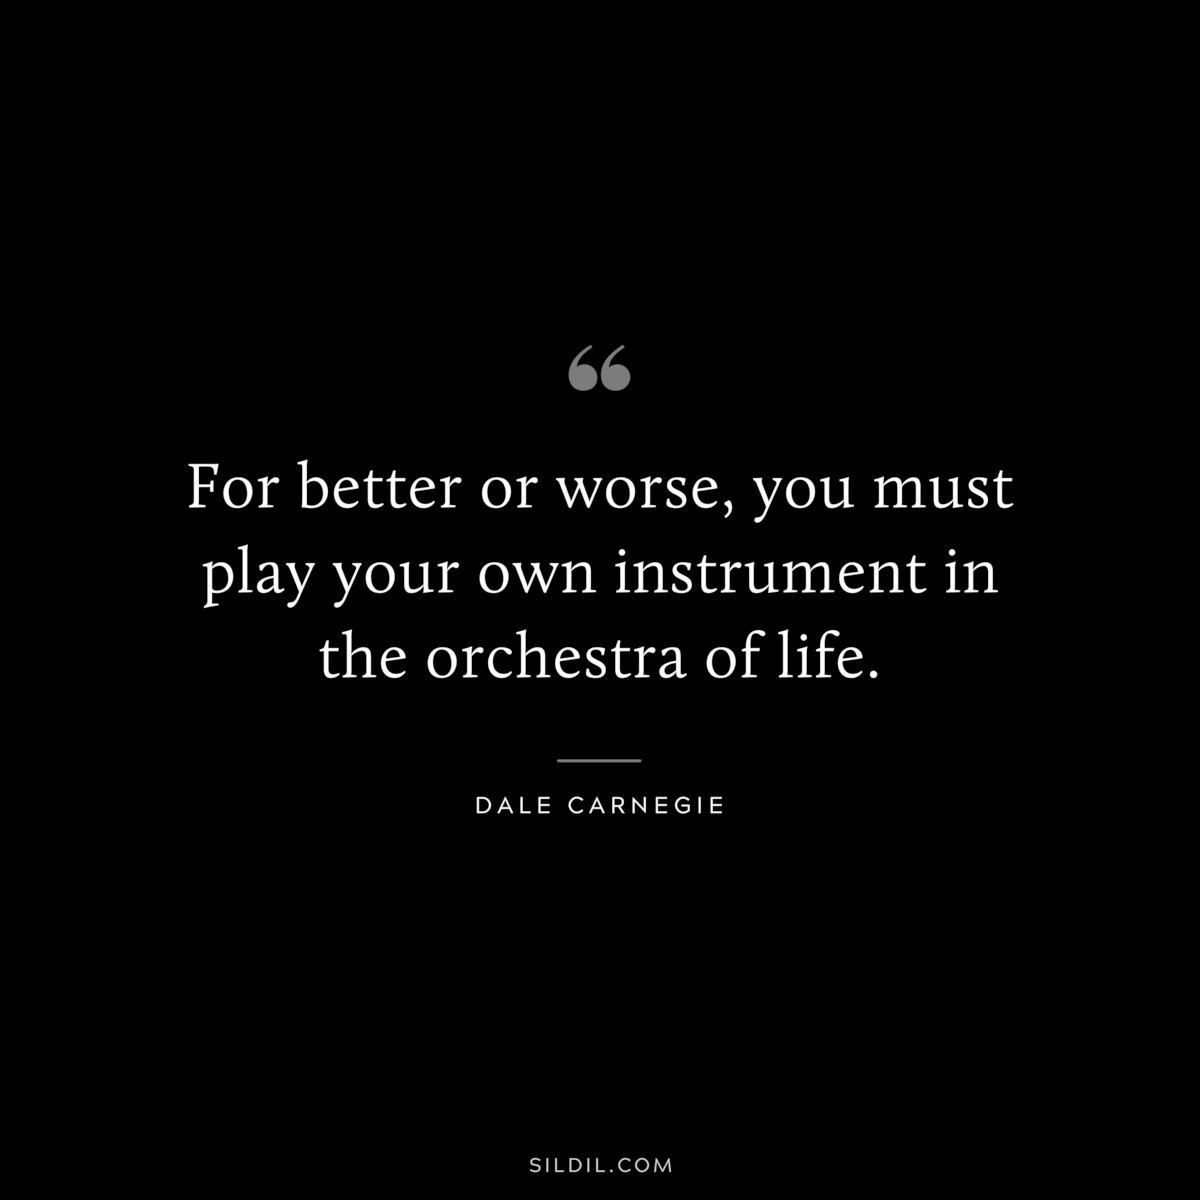 For better or worse, you must play your own instrument in the orchestra of life.― Dale Carnegie